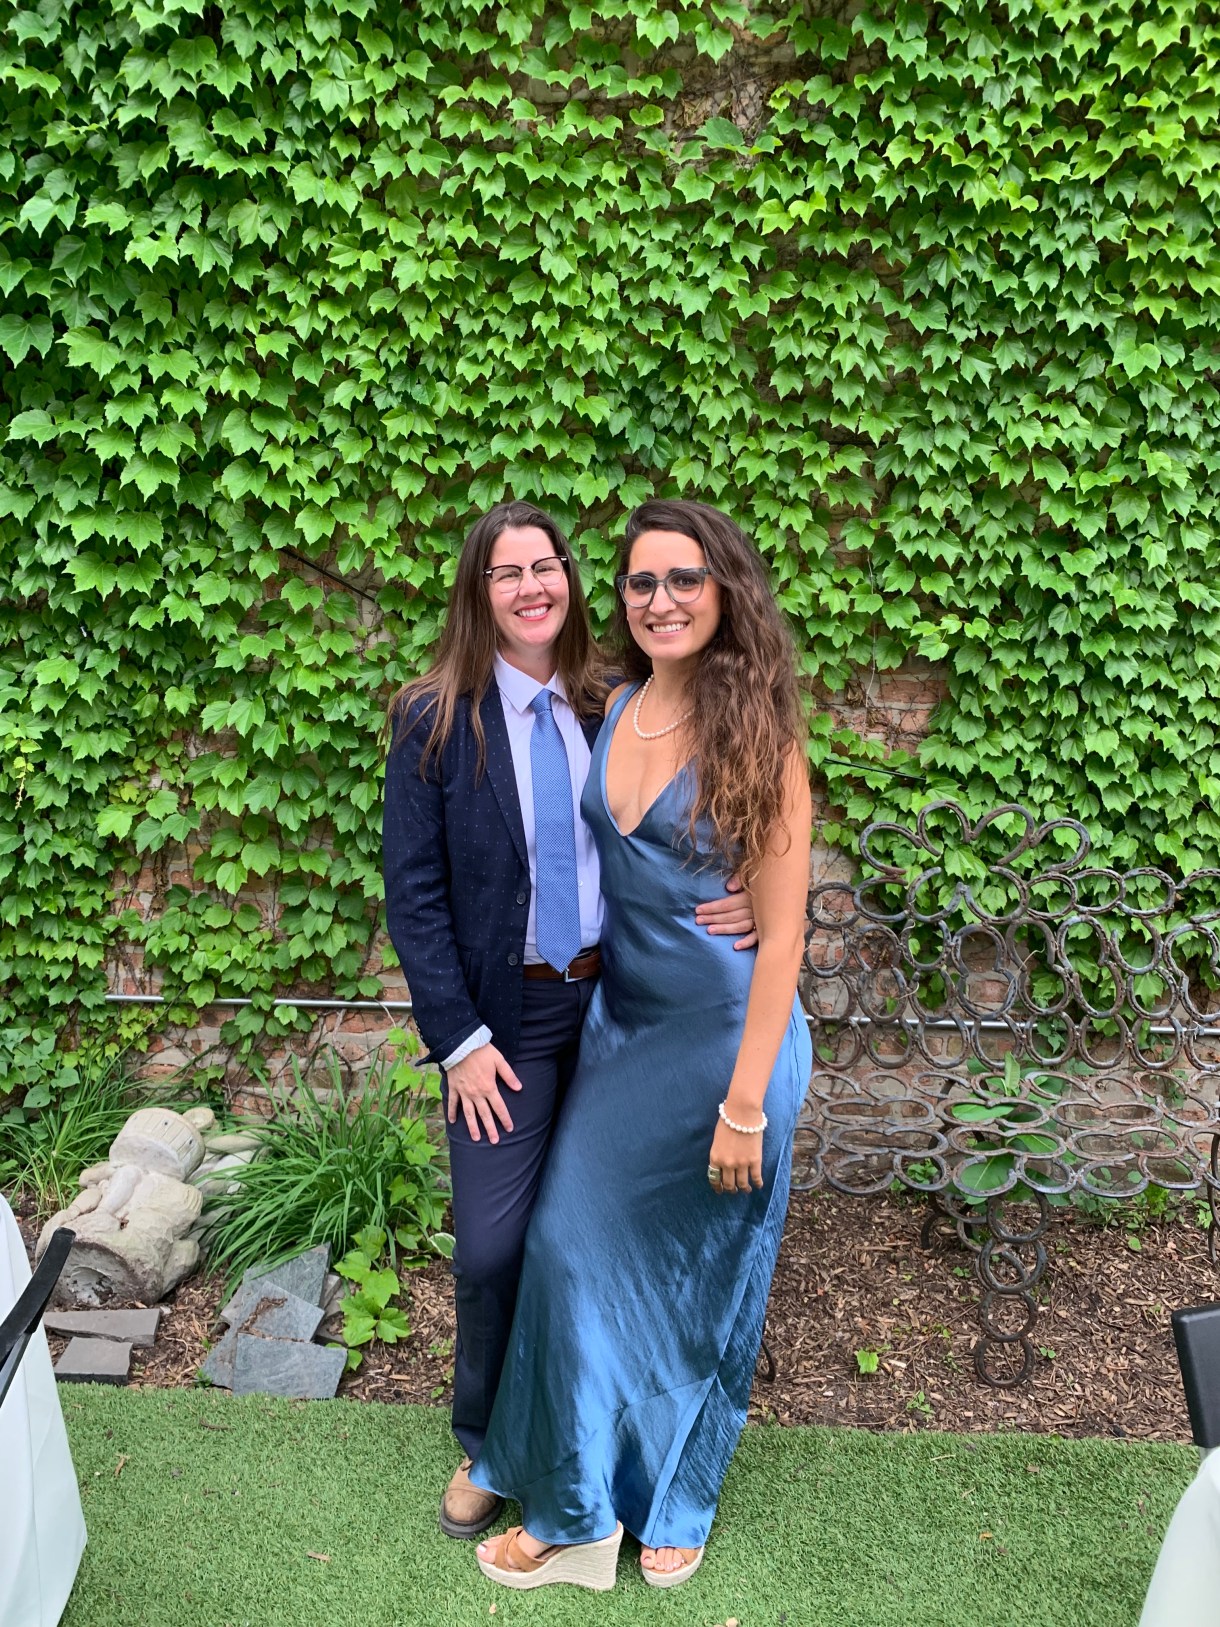 Kayla stands with her girlfriend Kristen in front of an ivy covered wall. Kristen is a white butch human wearing a blue suit. Kayla is a South Asian woman wearing a satiny blue dress with long brown hair and glasses.